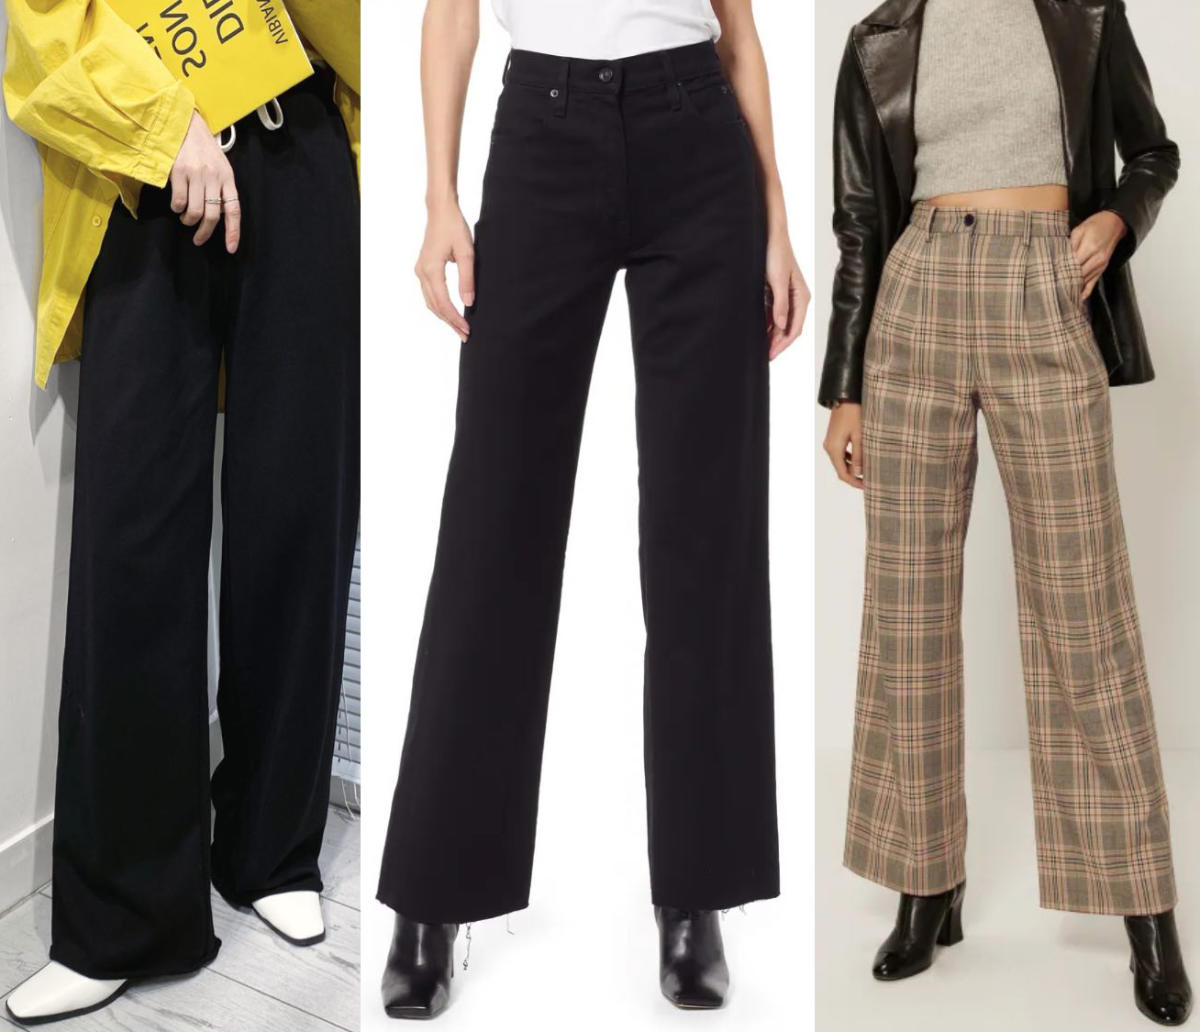 3 women wearing ankle square toe boots with wide leg pants and trousers.